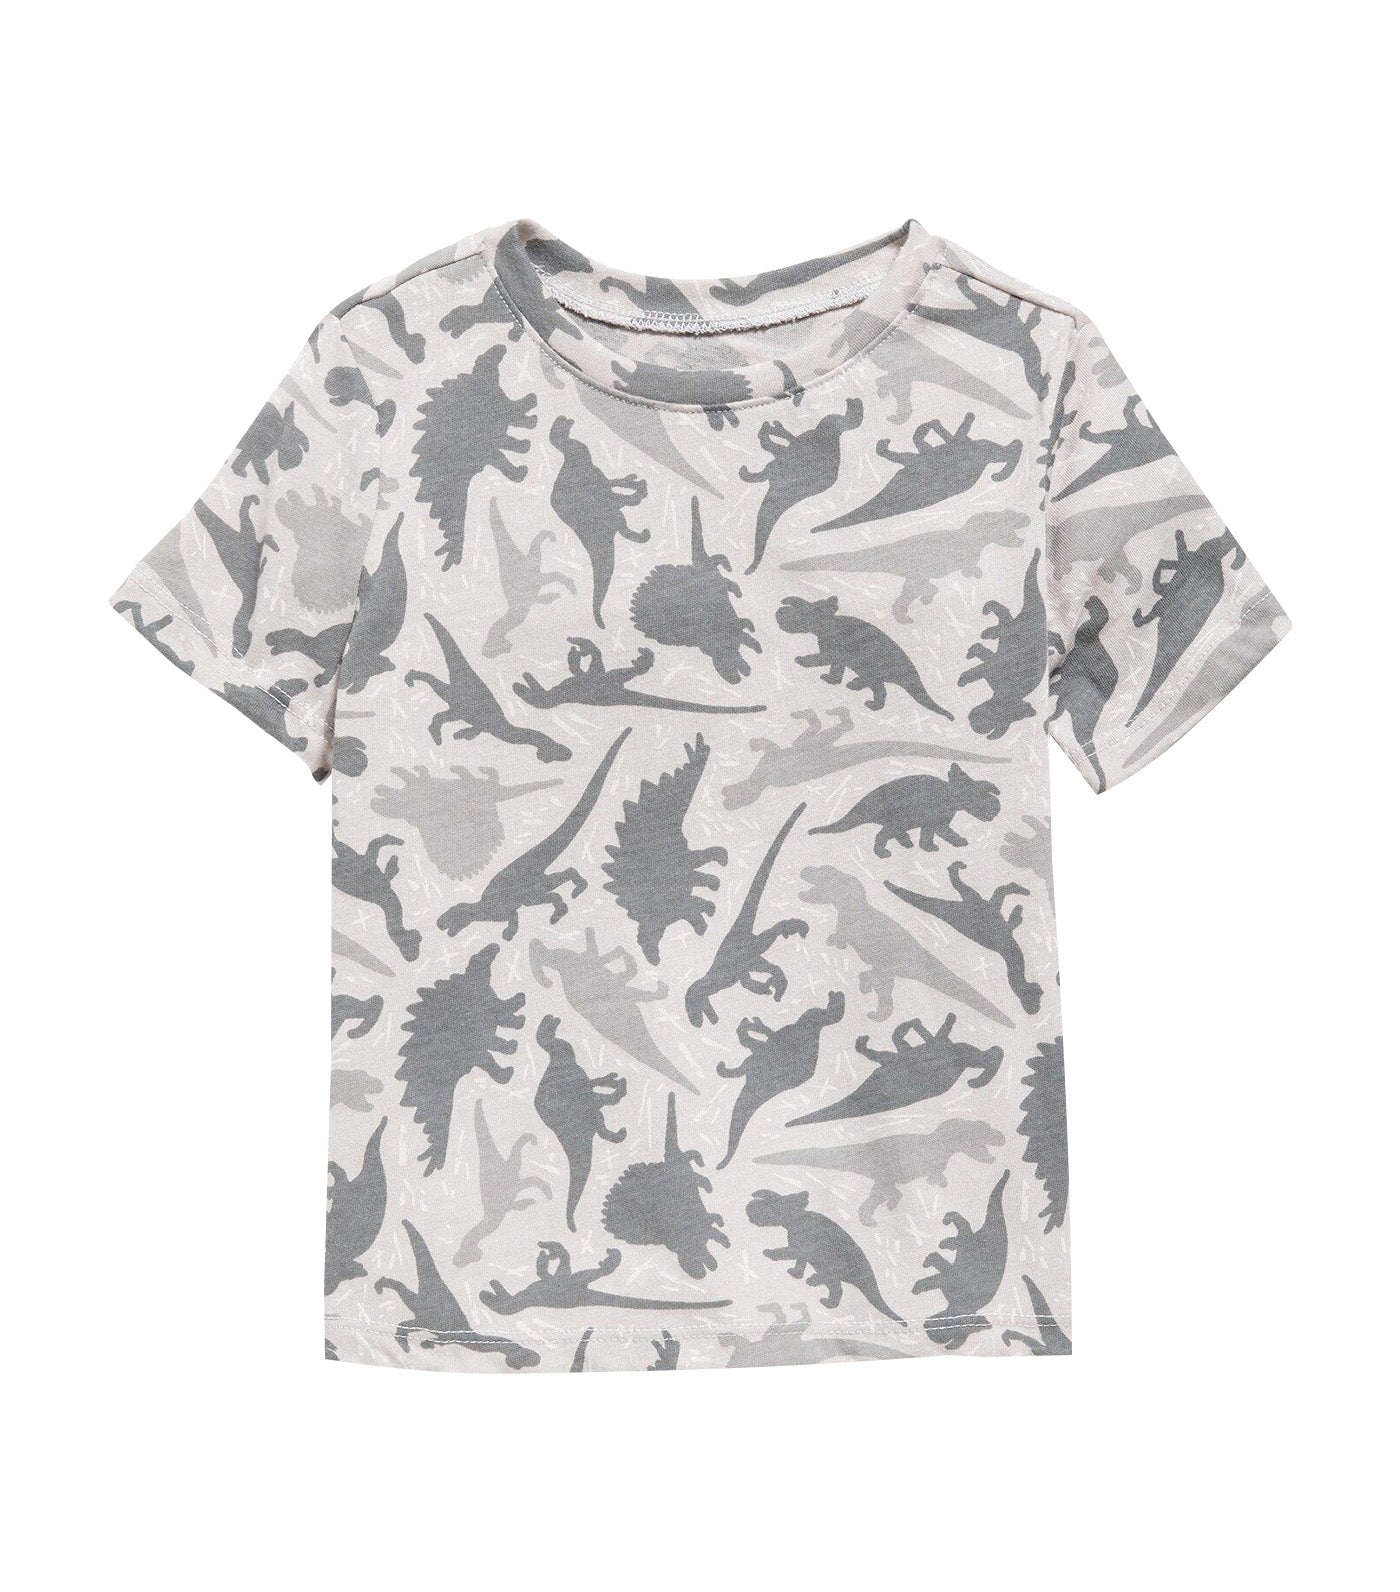 Unisex Printed T-Shirt for Toddler Dino